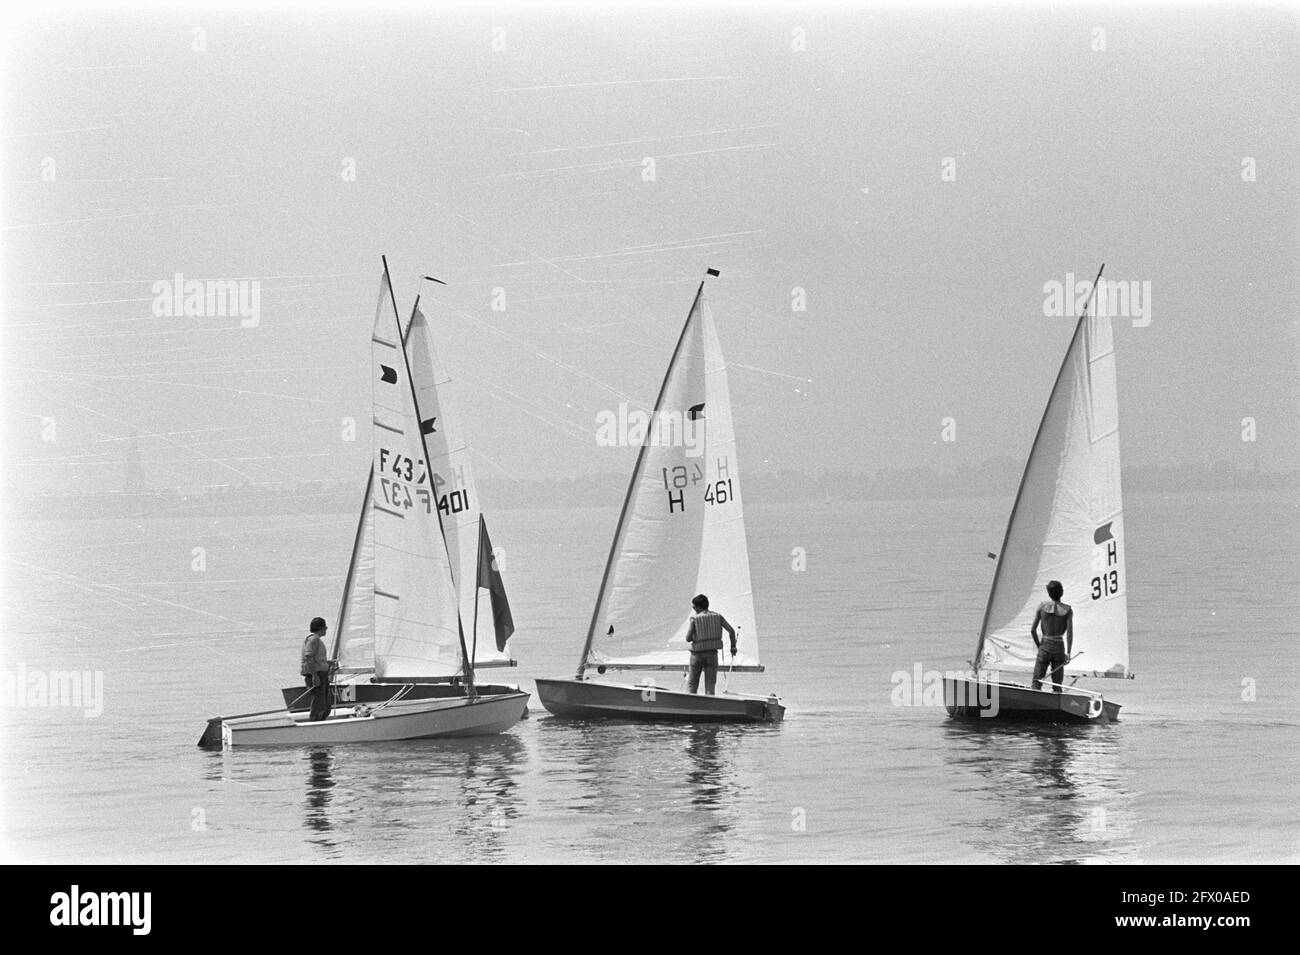 European championships OK-jollies on the IJsselmeer; survey of races, July 31, 1970, CHAMPIONSHIPS, CONTEST, jollies, overviews, The Netherlands, 20th century press agency photo, news to remember, documentary, historic photography 1945-1990, visual stories, human history of the Twentieth Century, capturing moments in time Stock Photo